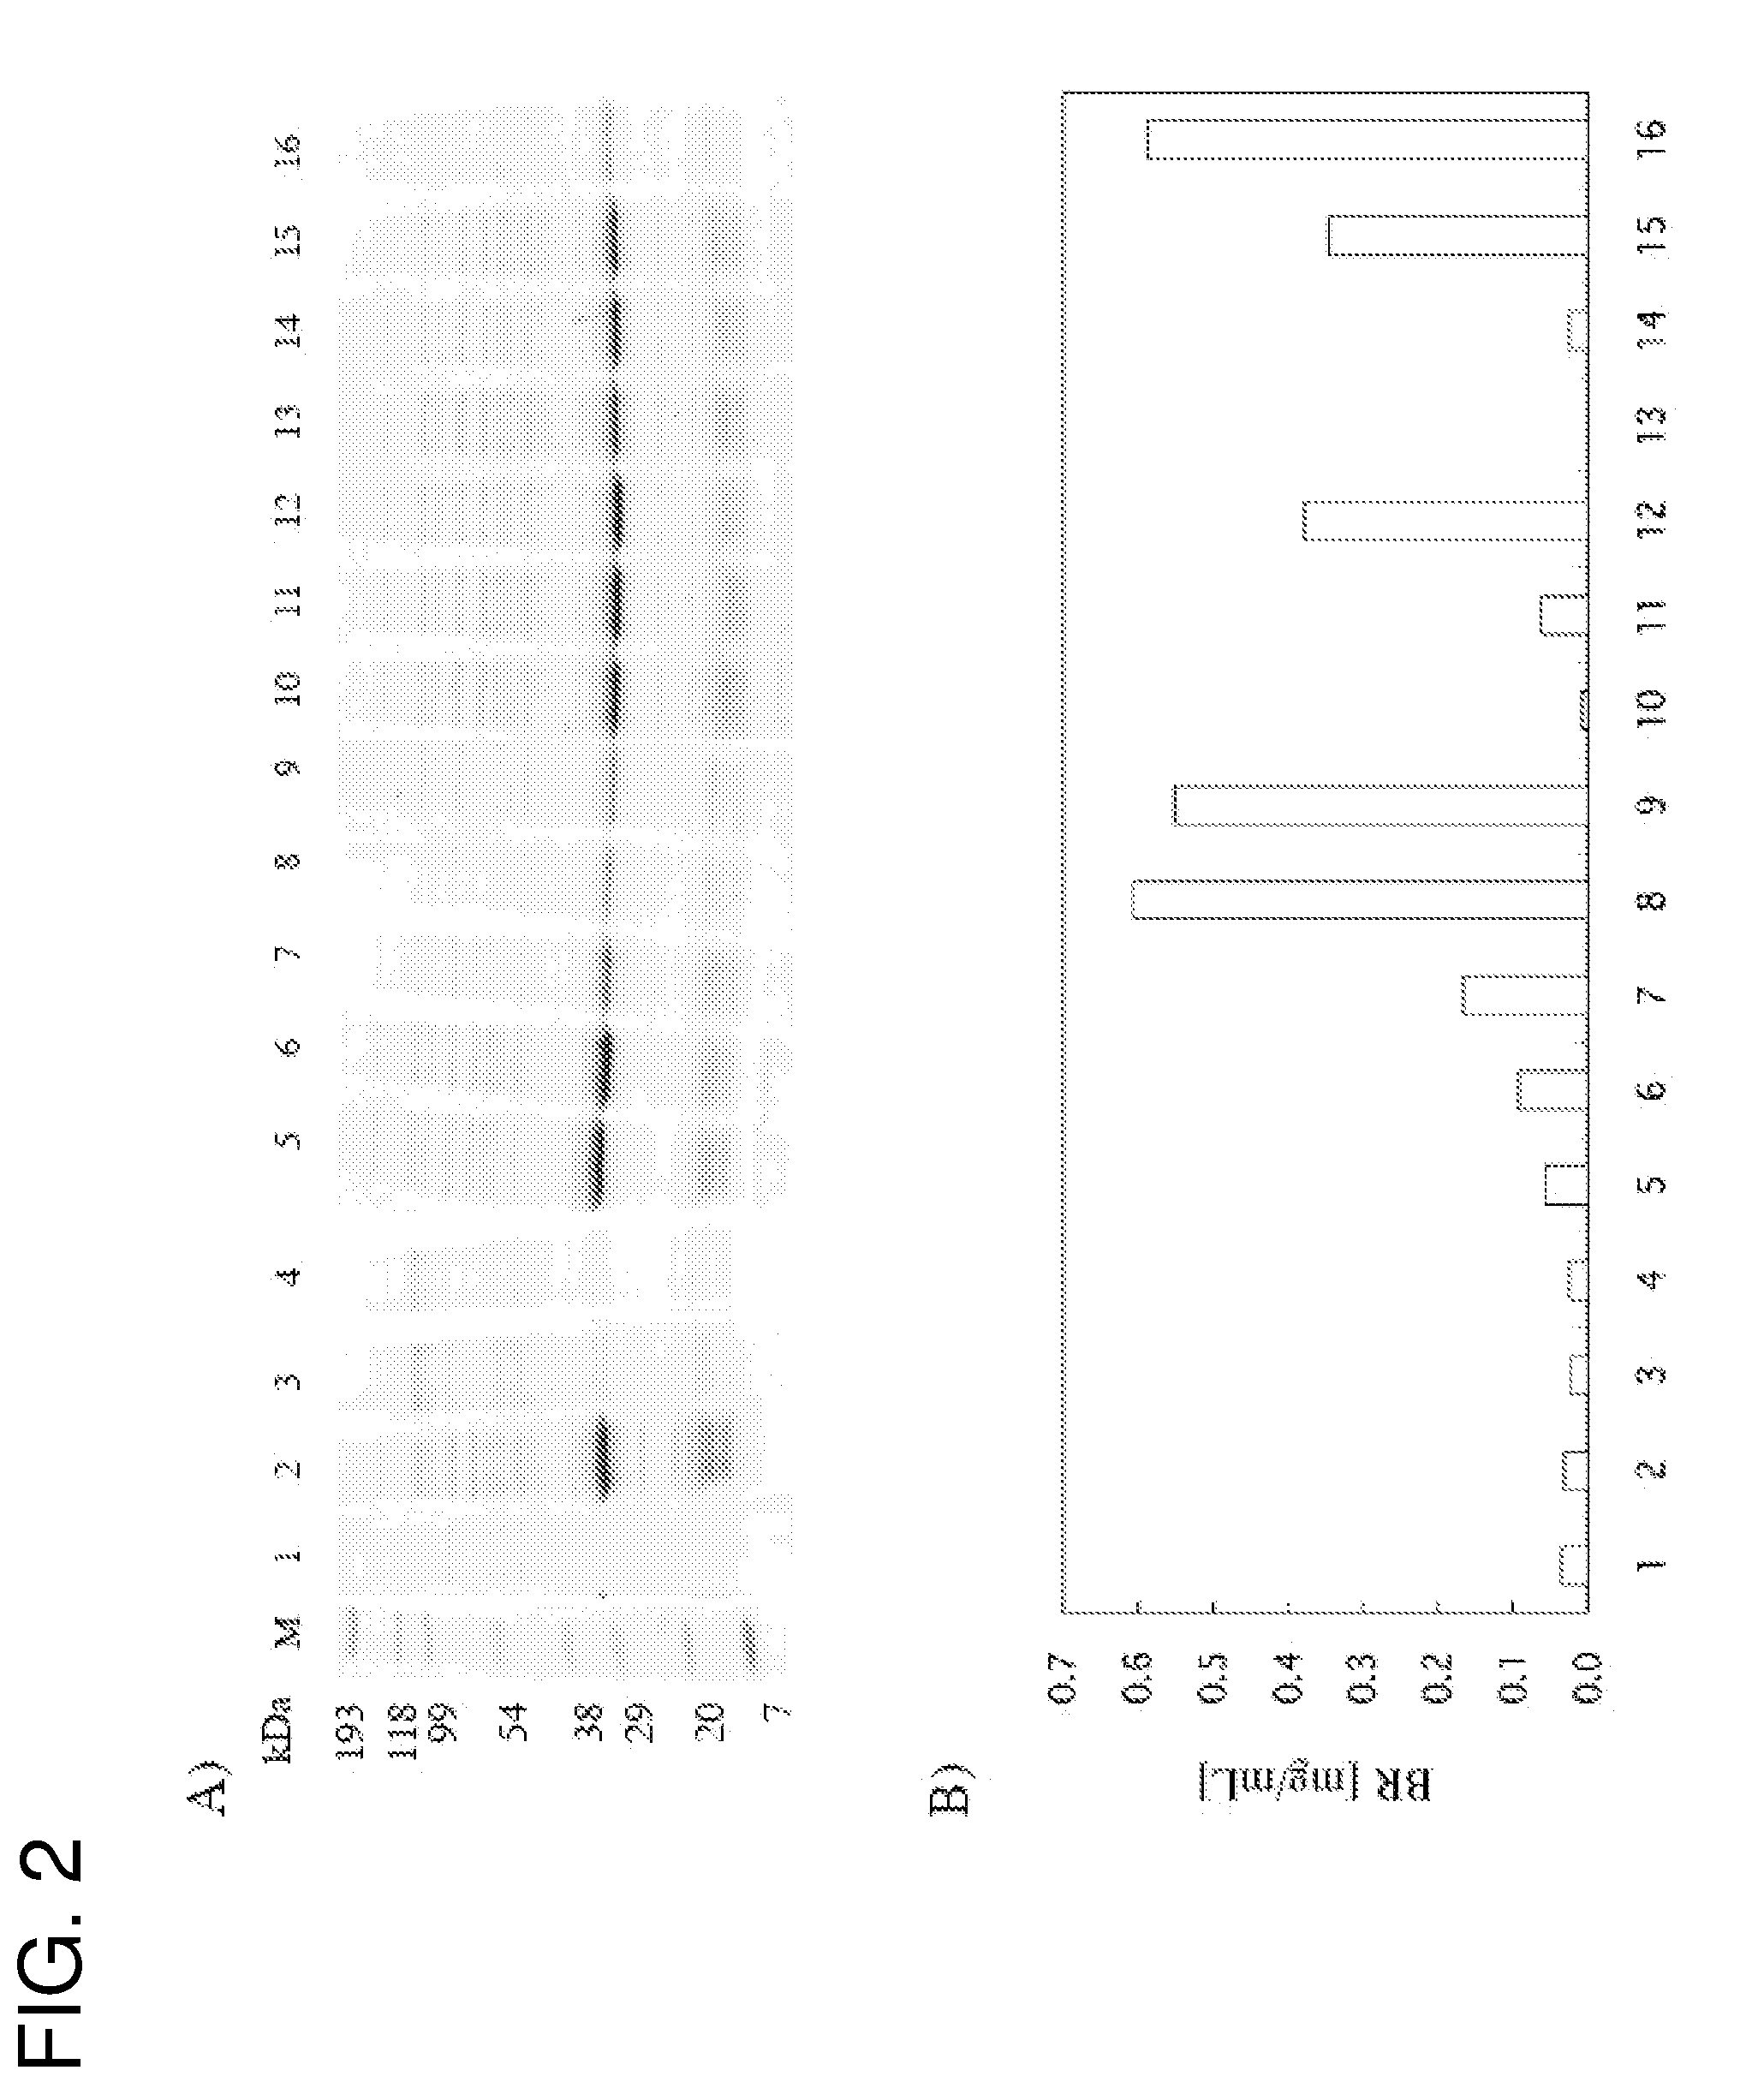 Method for producing a membrane protein